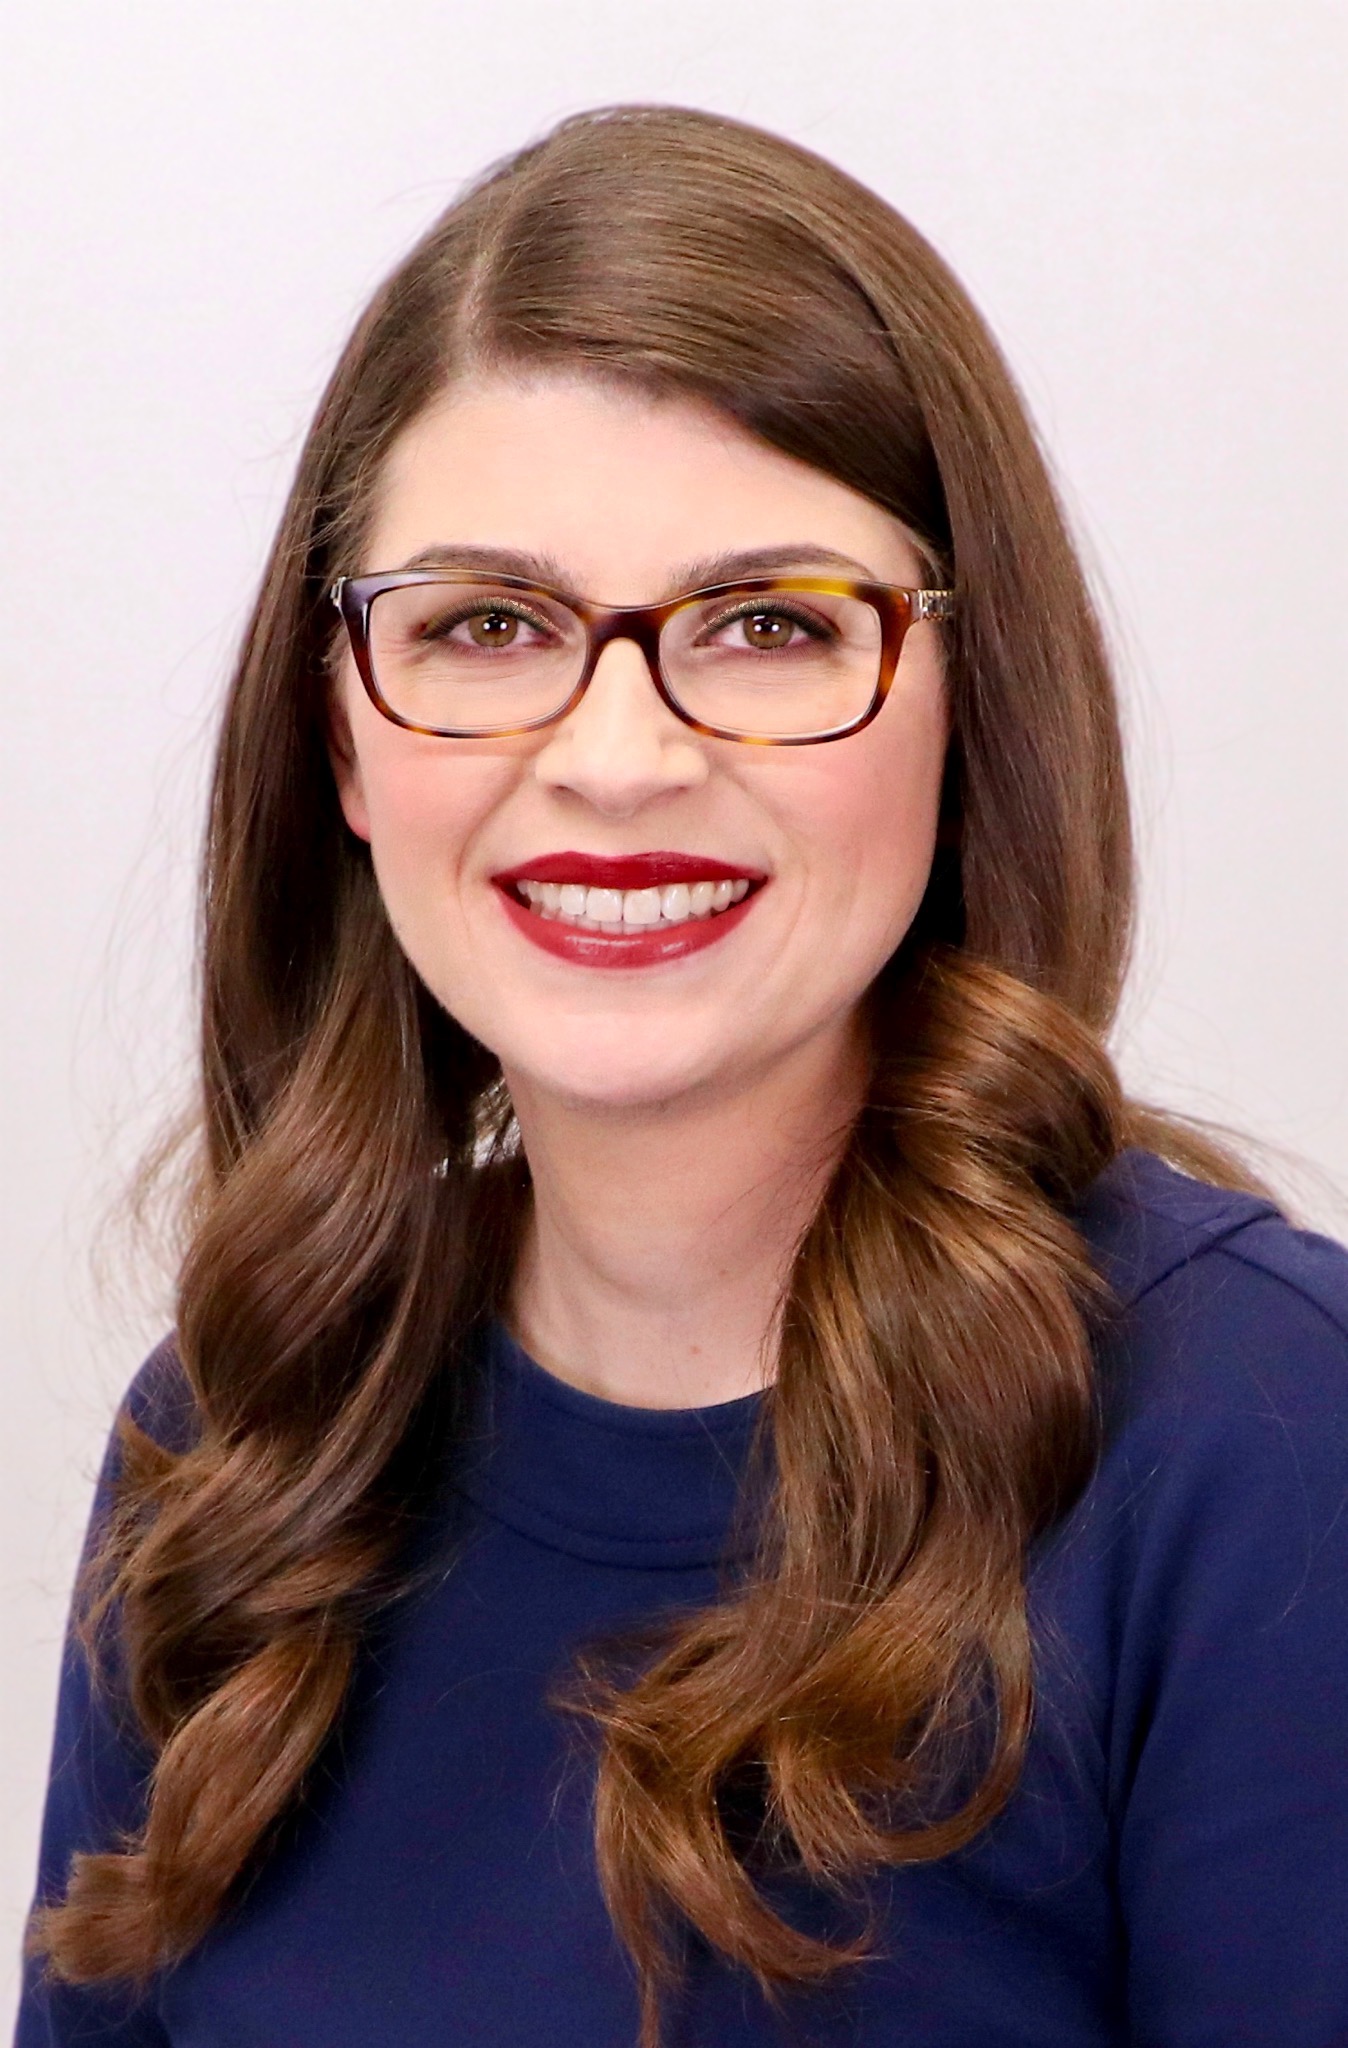 Woman with brown hair, glasses, and a navy blue top smiling.